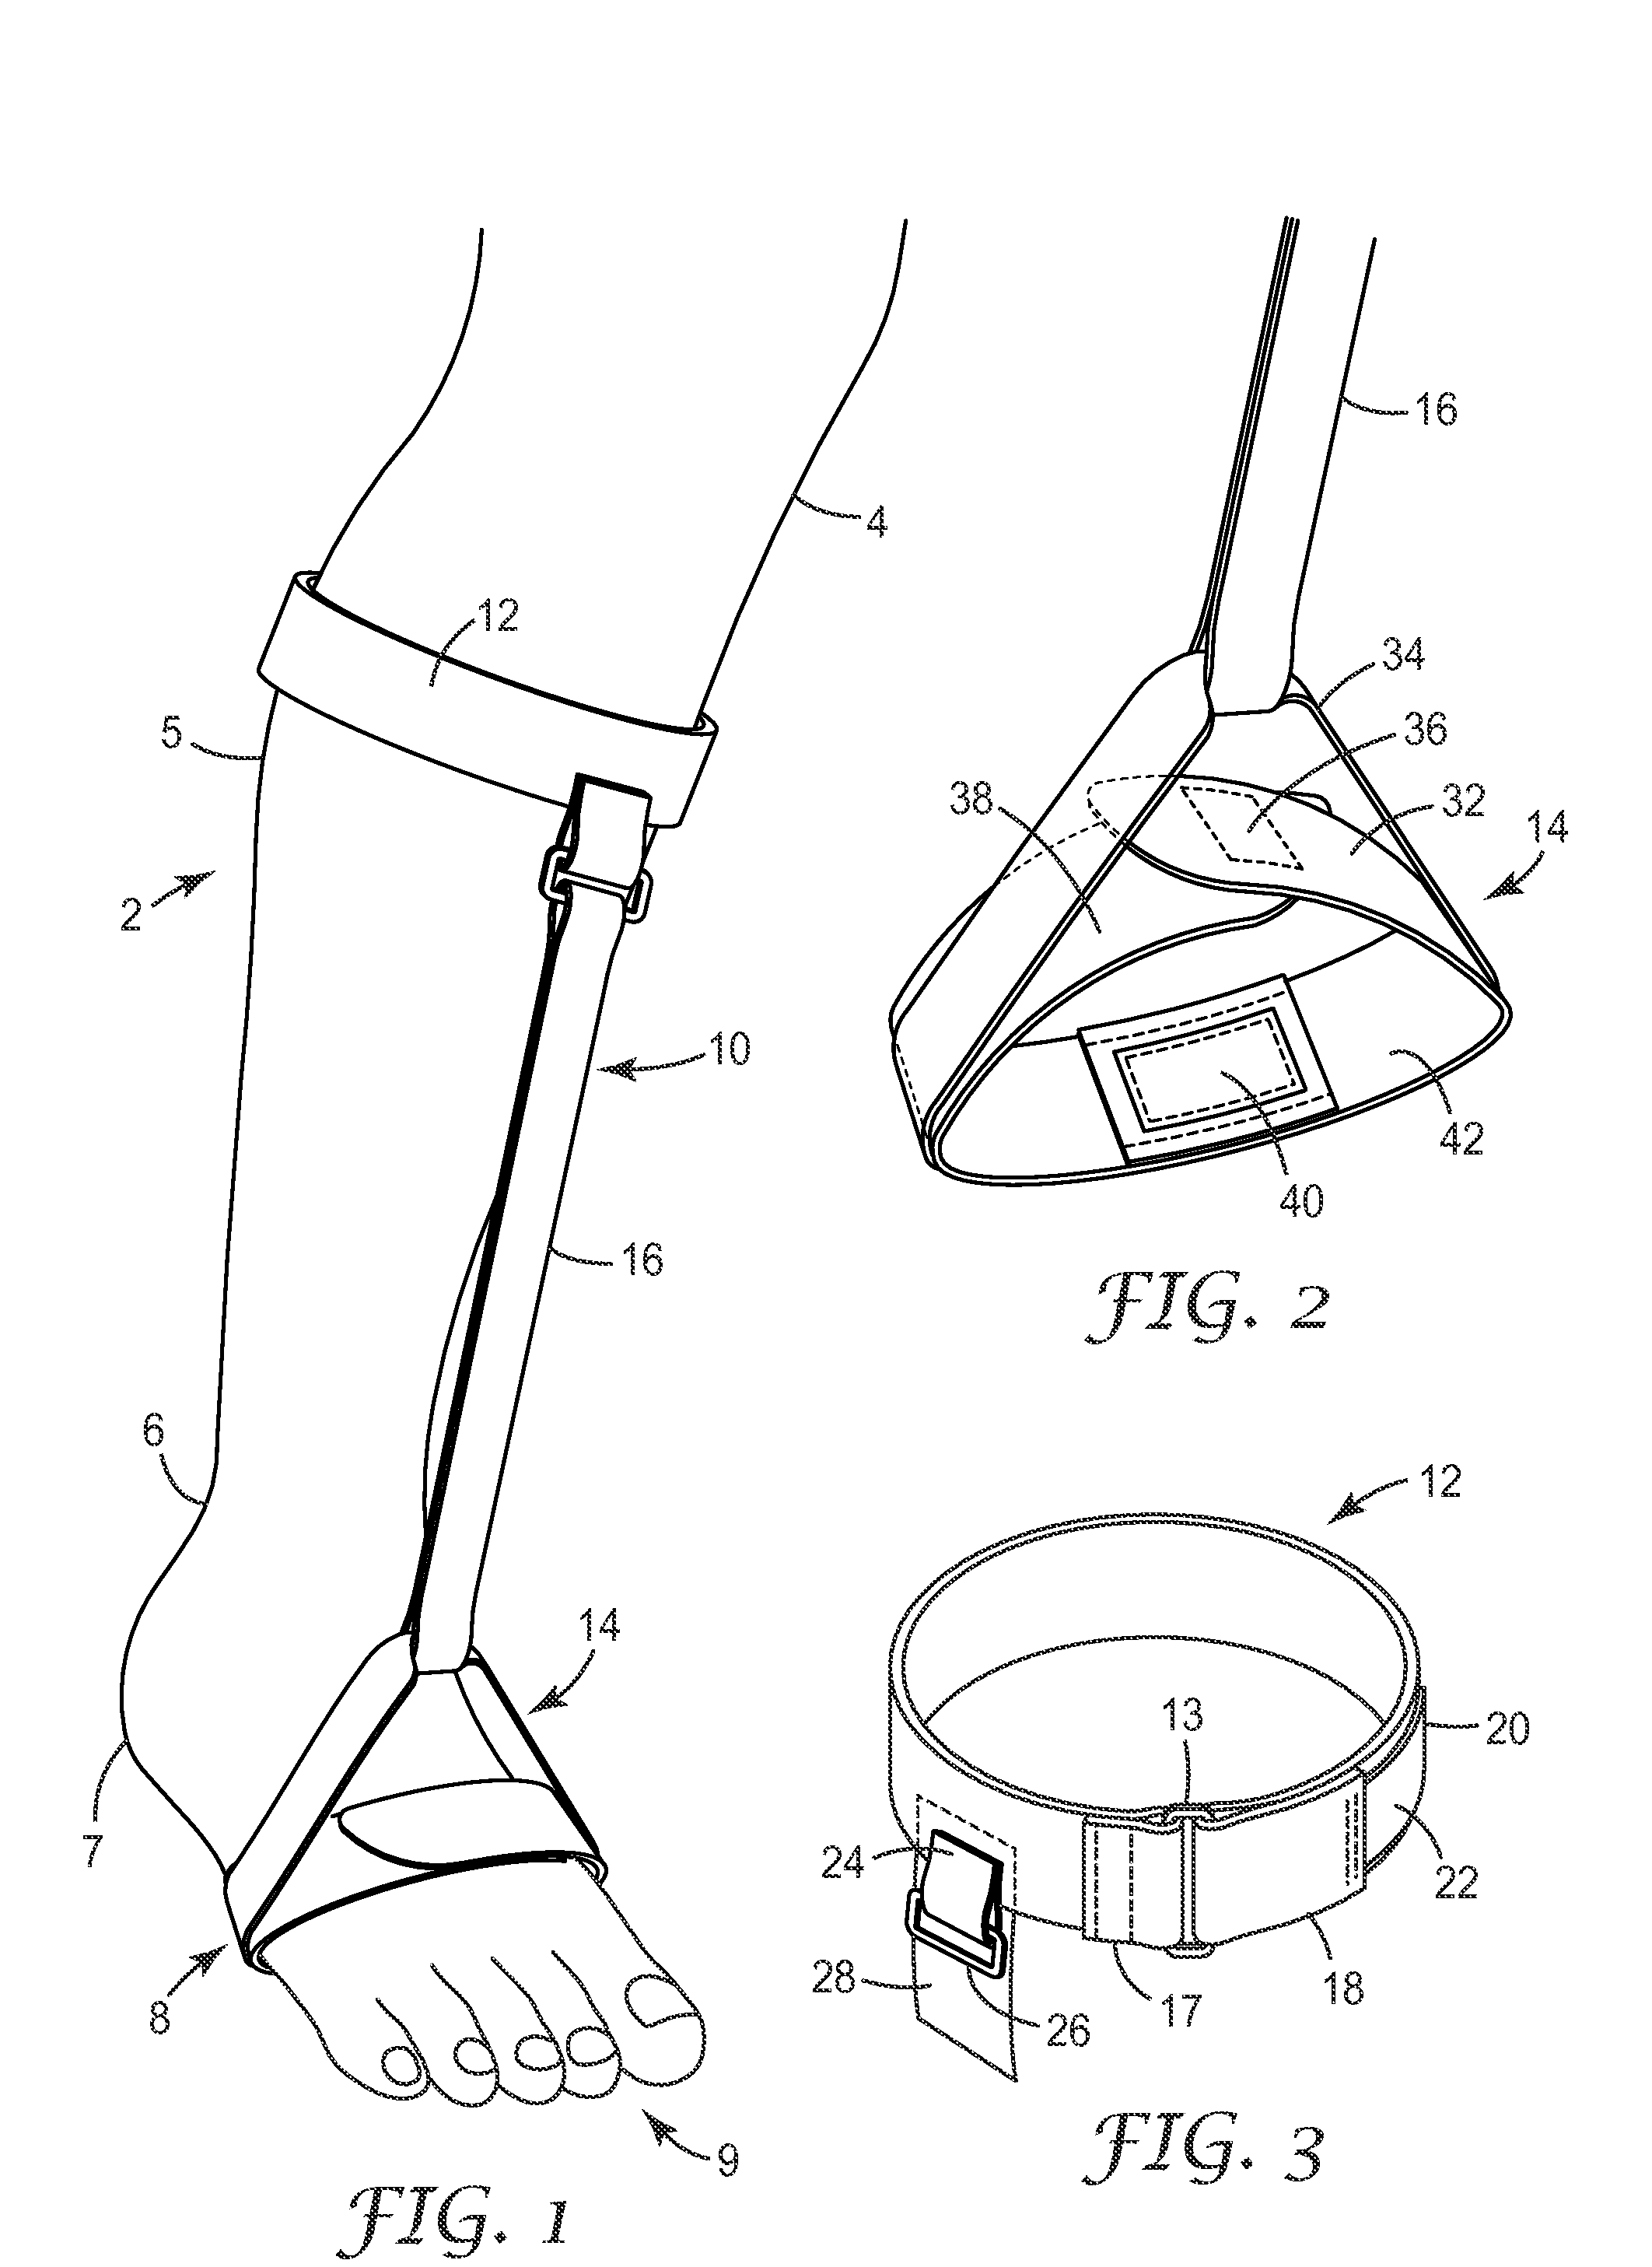 Foot support device